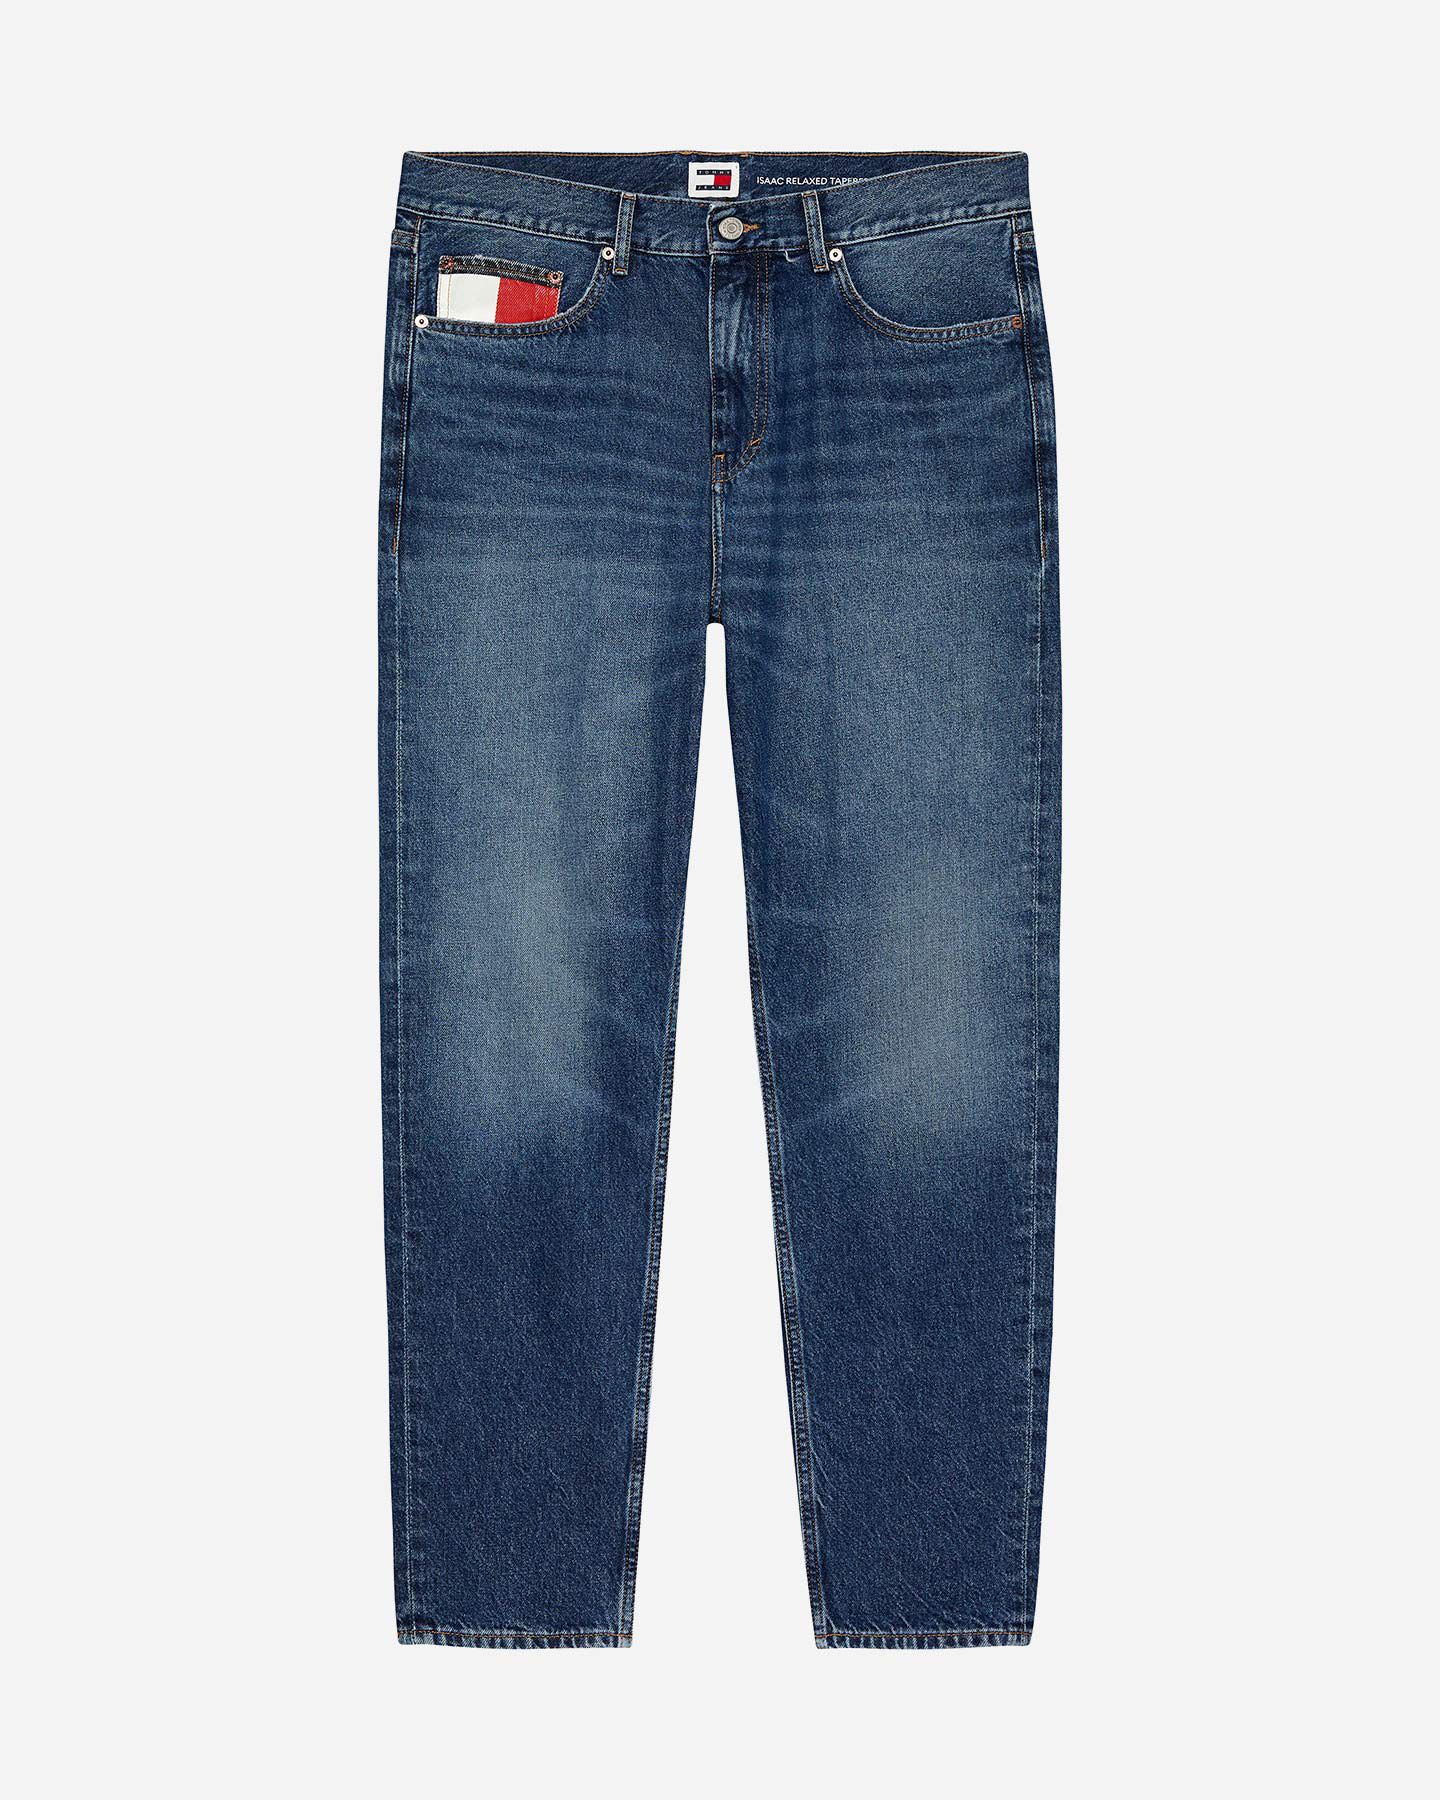  Jeans TOMMY HILFIGER ISAAC TAPERED M S5686198|UNI|32/30 scatto 0